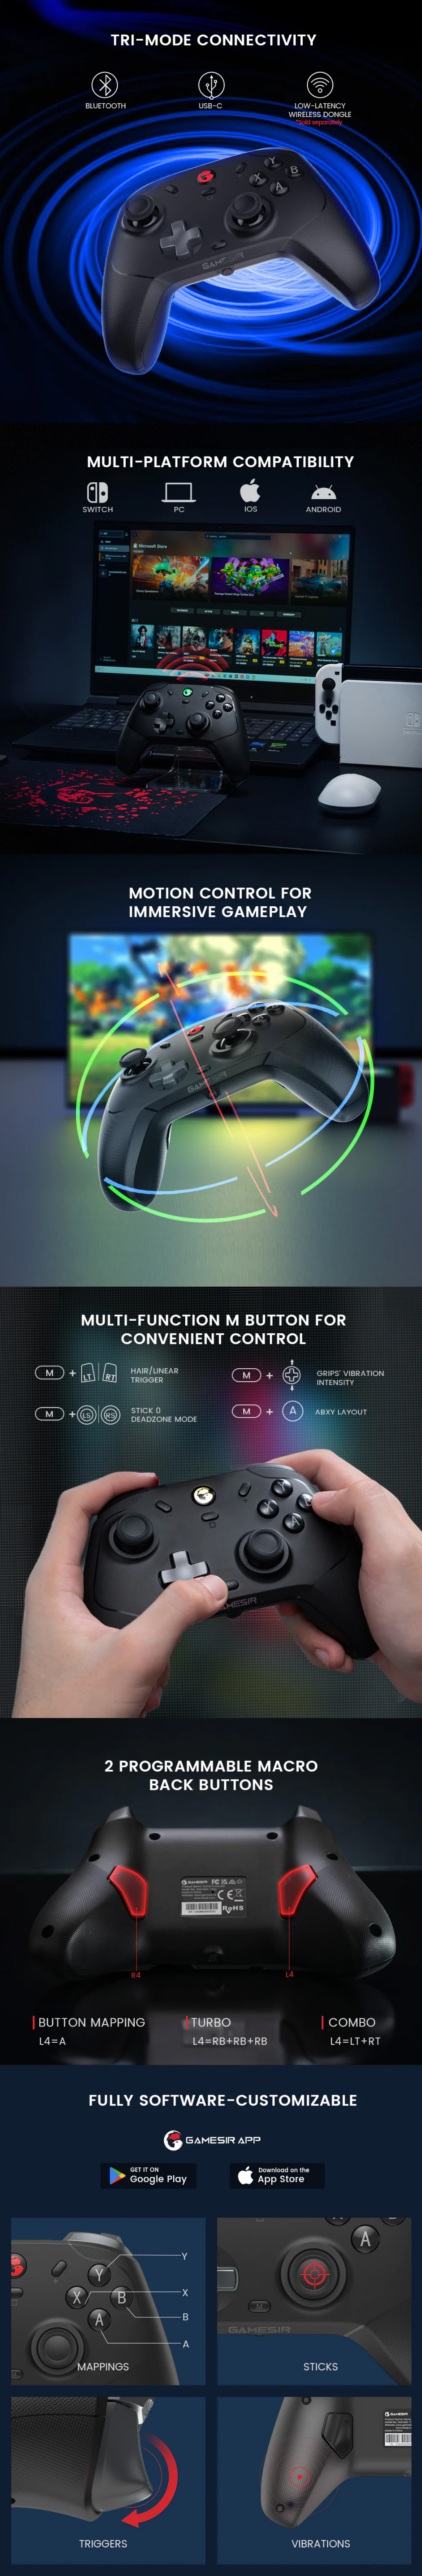 Gaming-Controllers-GameSir-T4-Cyclone-Pro-Multiplatform-Wireless-Gamepad-with-Hall-Effect-Sticks-and-Triggers-2